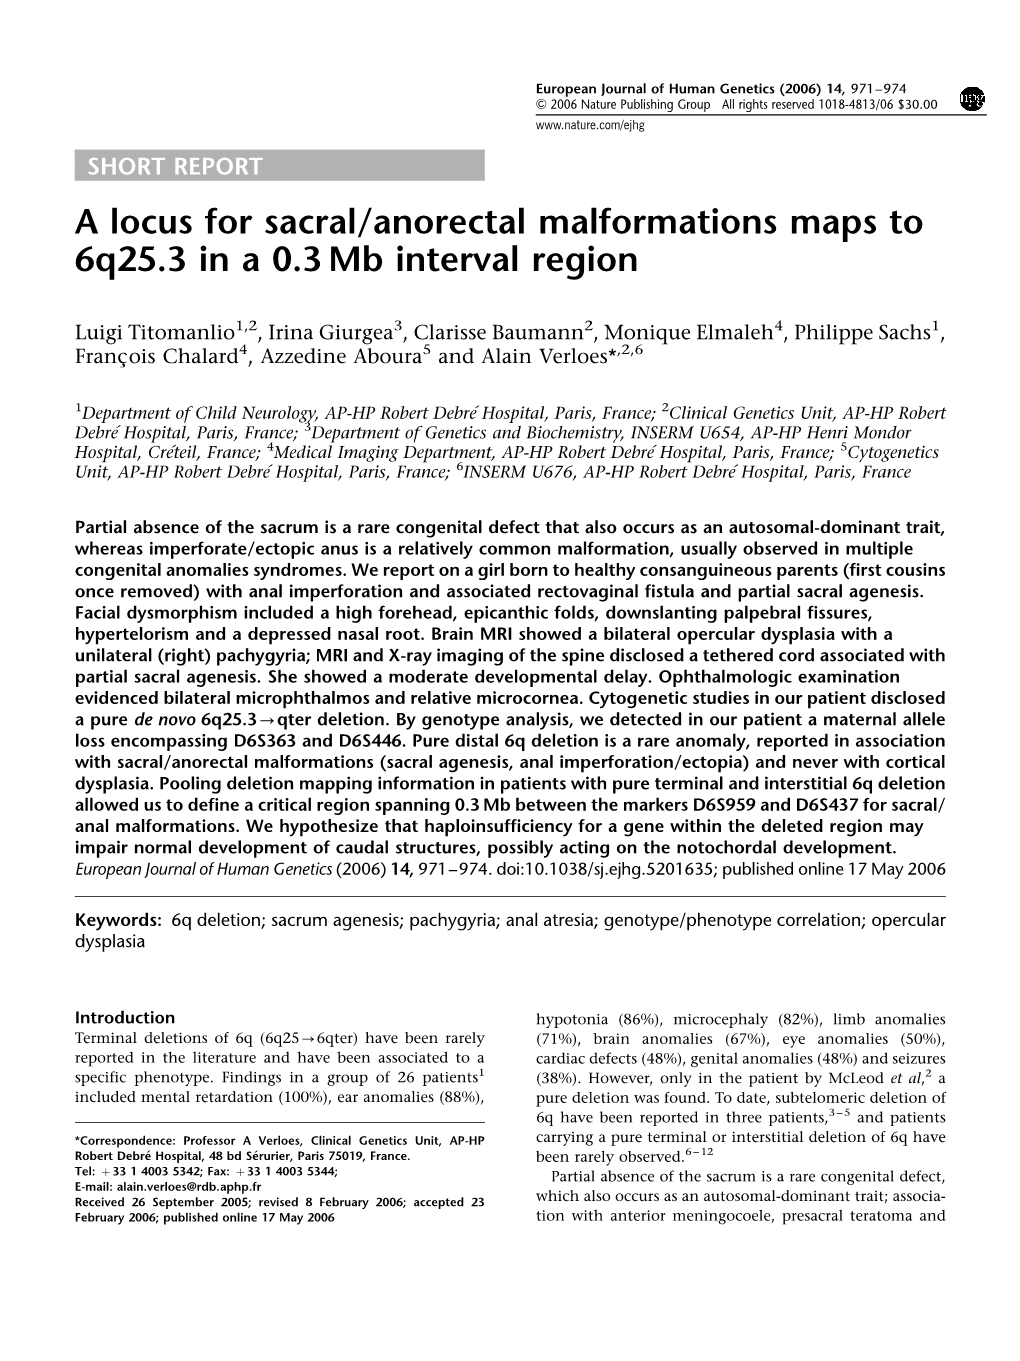 A Locus for Sacral/Anorectal Malformations Maps to 6Q25.3 in a 0.3 Mb Interval Region